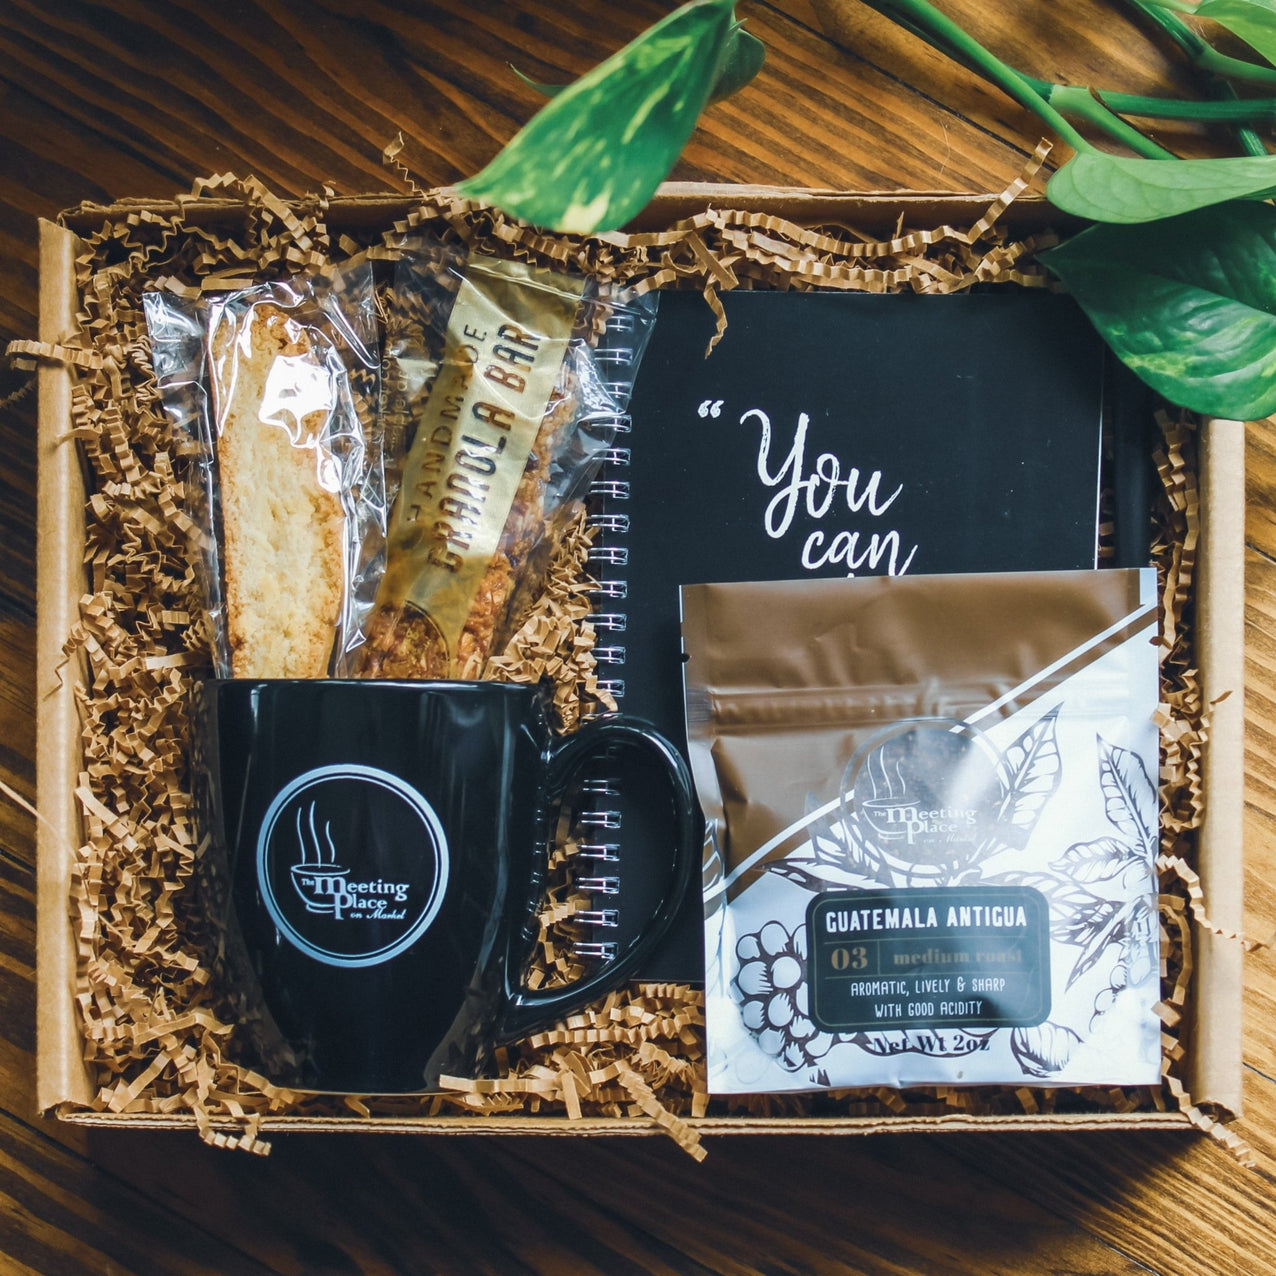 Deluxe New Hire Gift Box Corporate Gift Baskets - The Meeting Place on Market